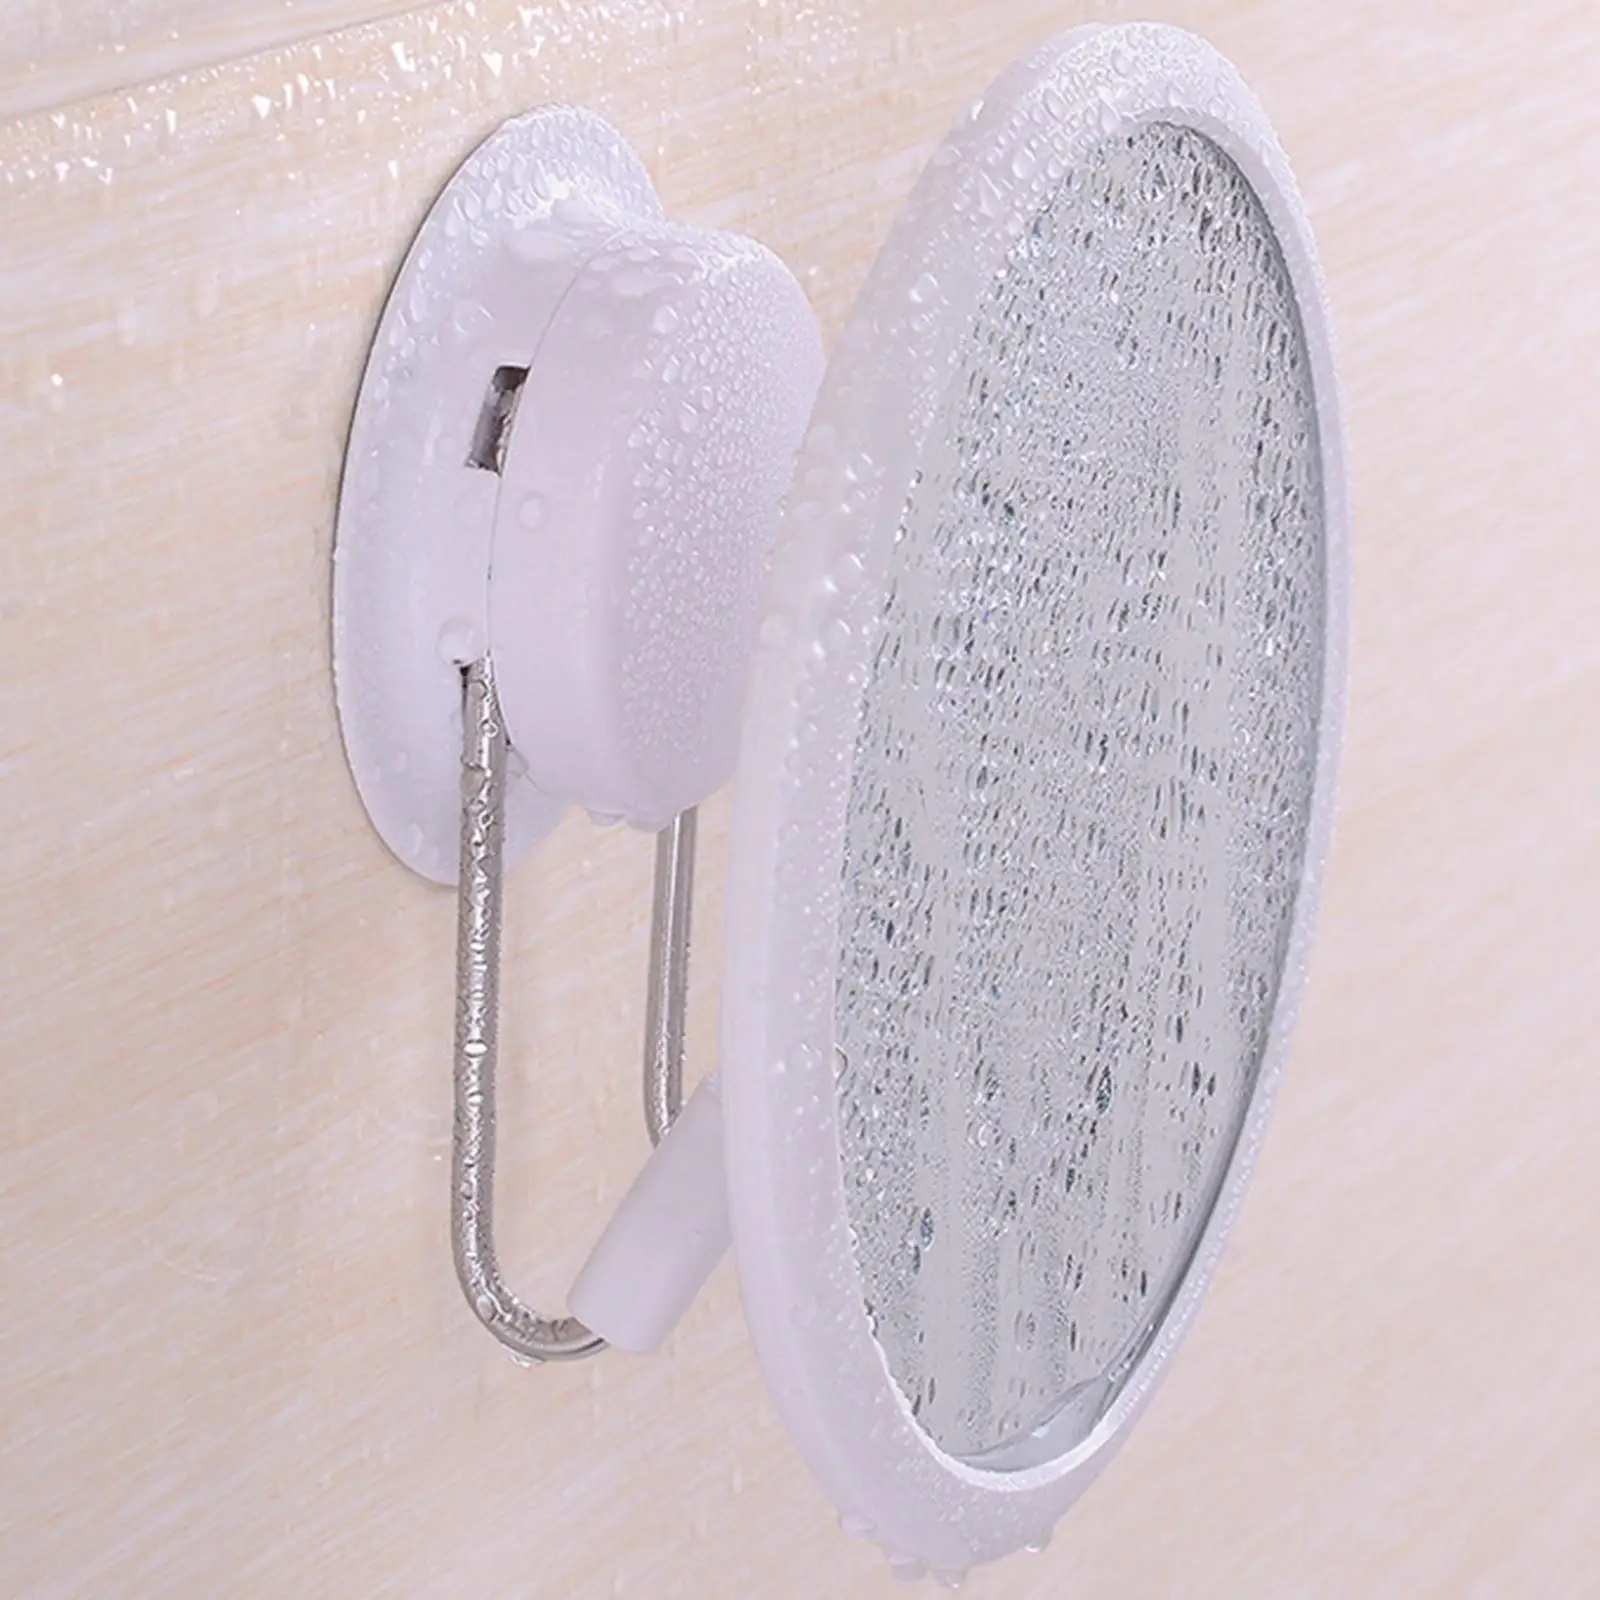 Wall Mounted Makeup Mirror Punch Free Folding Rotatable No Damage to The Wall No Drills Easy to Clean Mirror Beauty Mirror